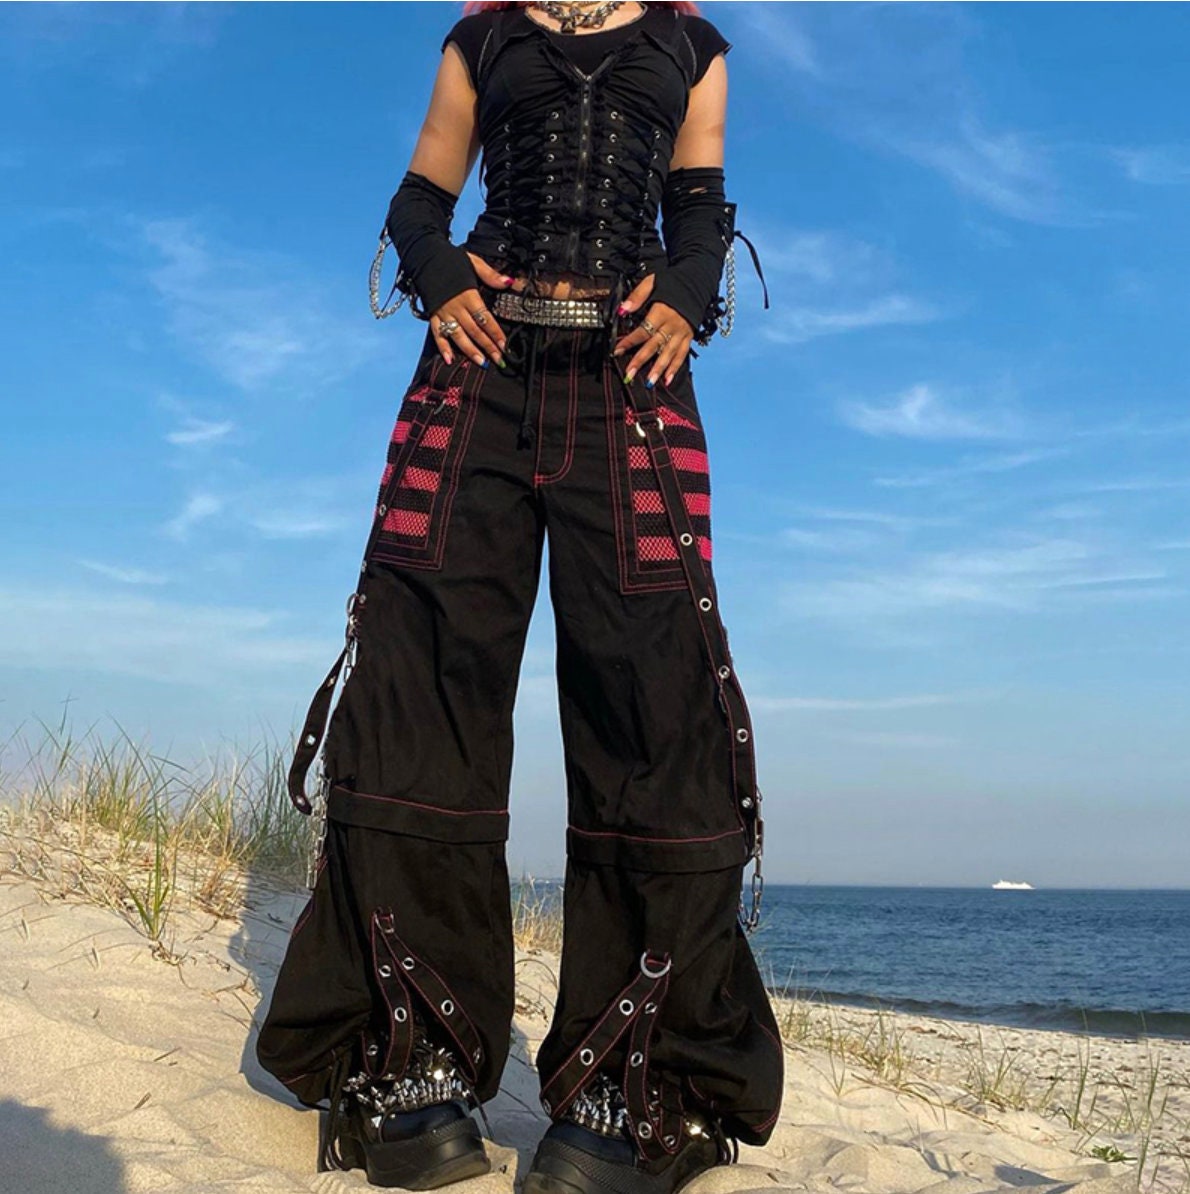 Gothic Chain Bandage goth clothing punk alt edgy mall goth Wide leg Pants Women Oversize Low Rise Dark Trousers 90s Baggy Pant Punk Style # 202